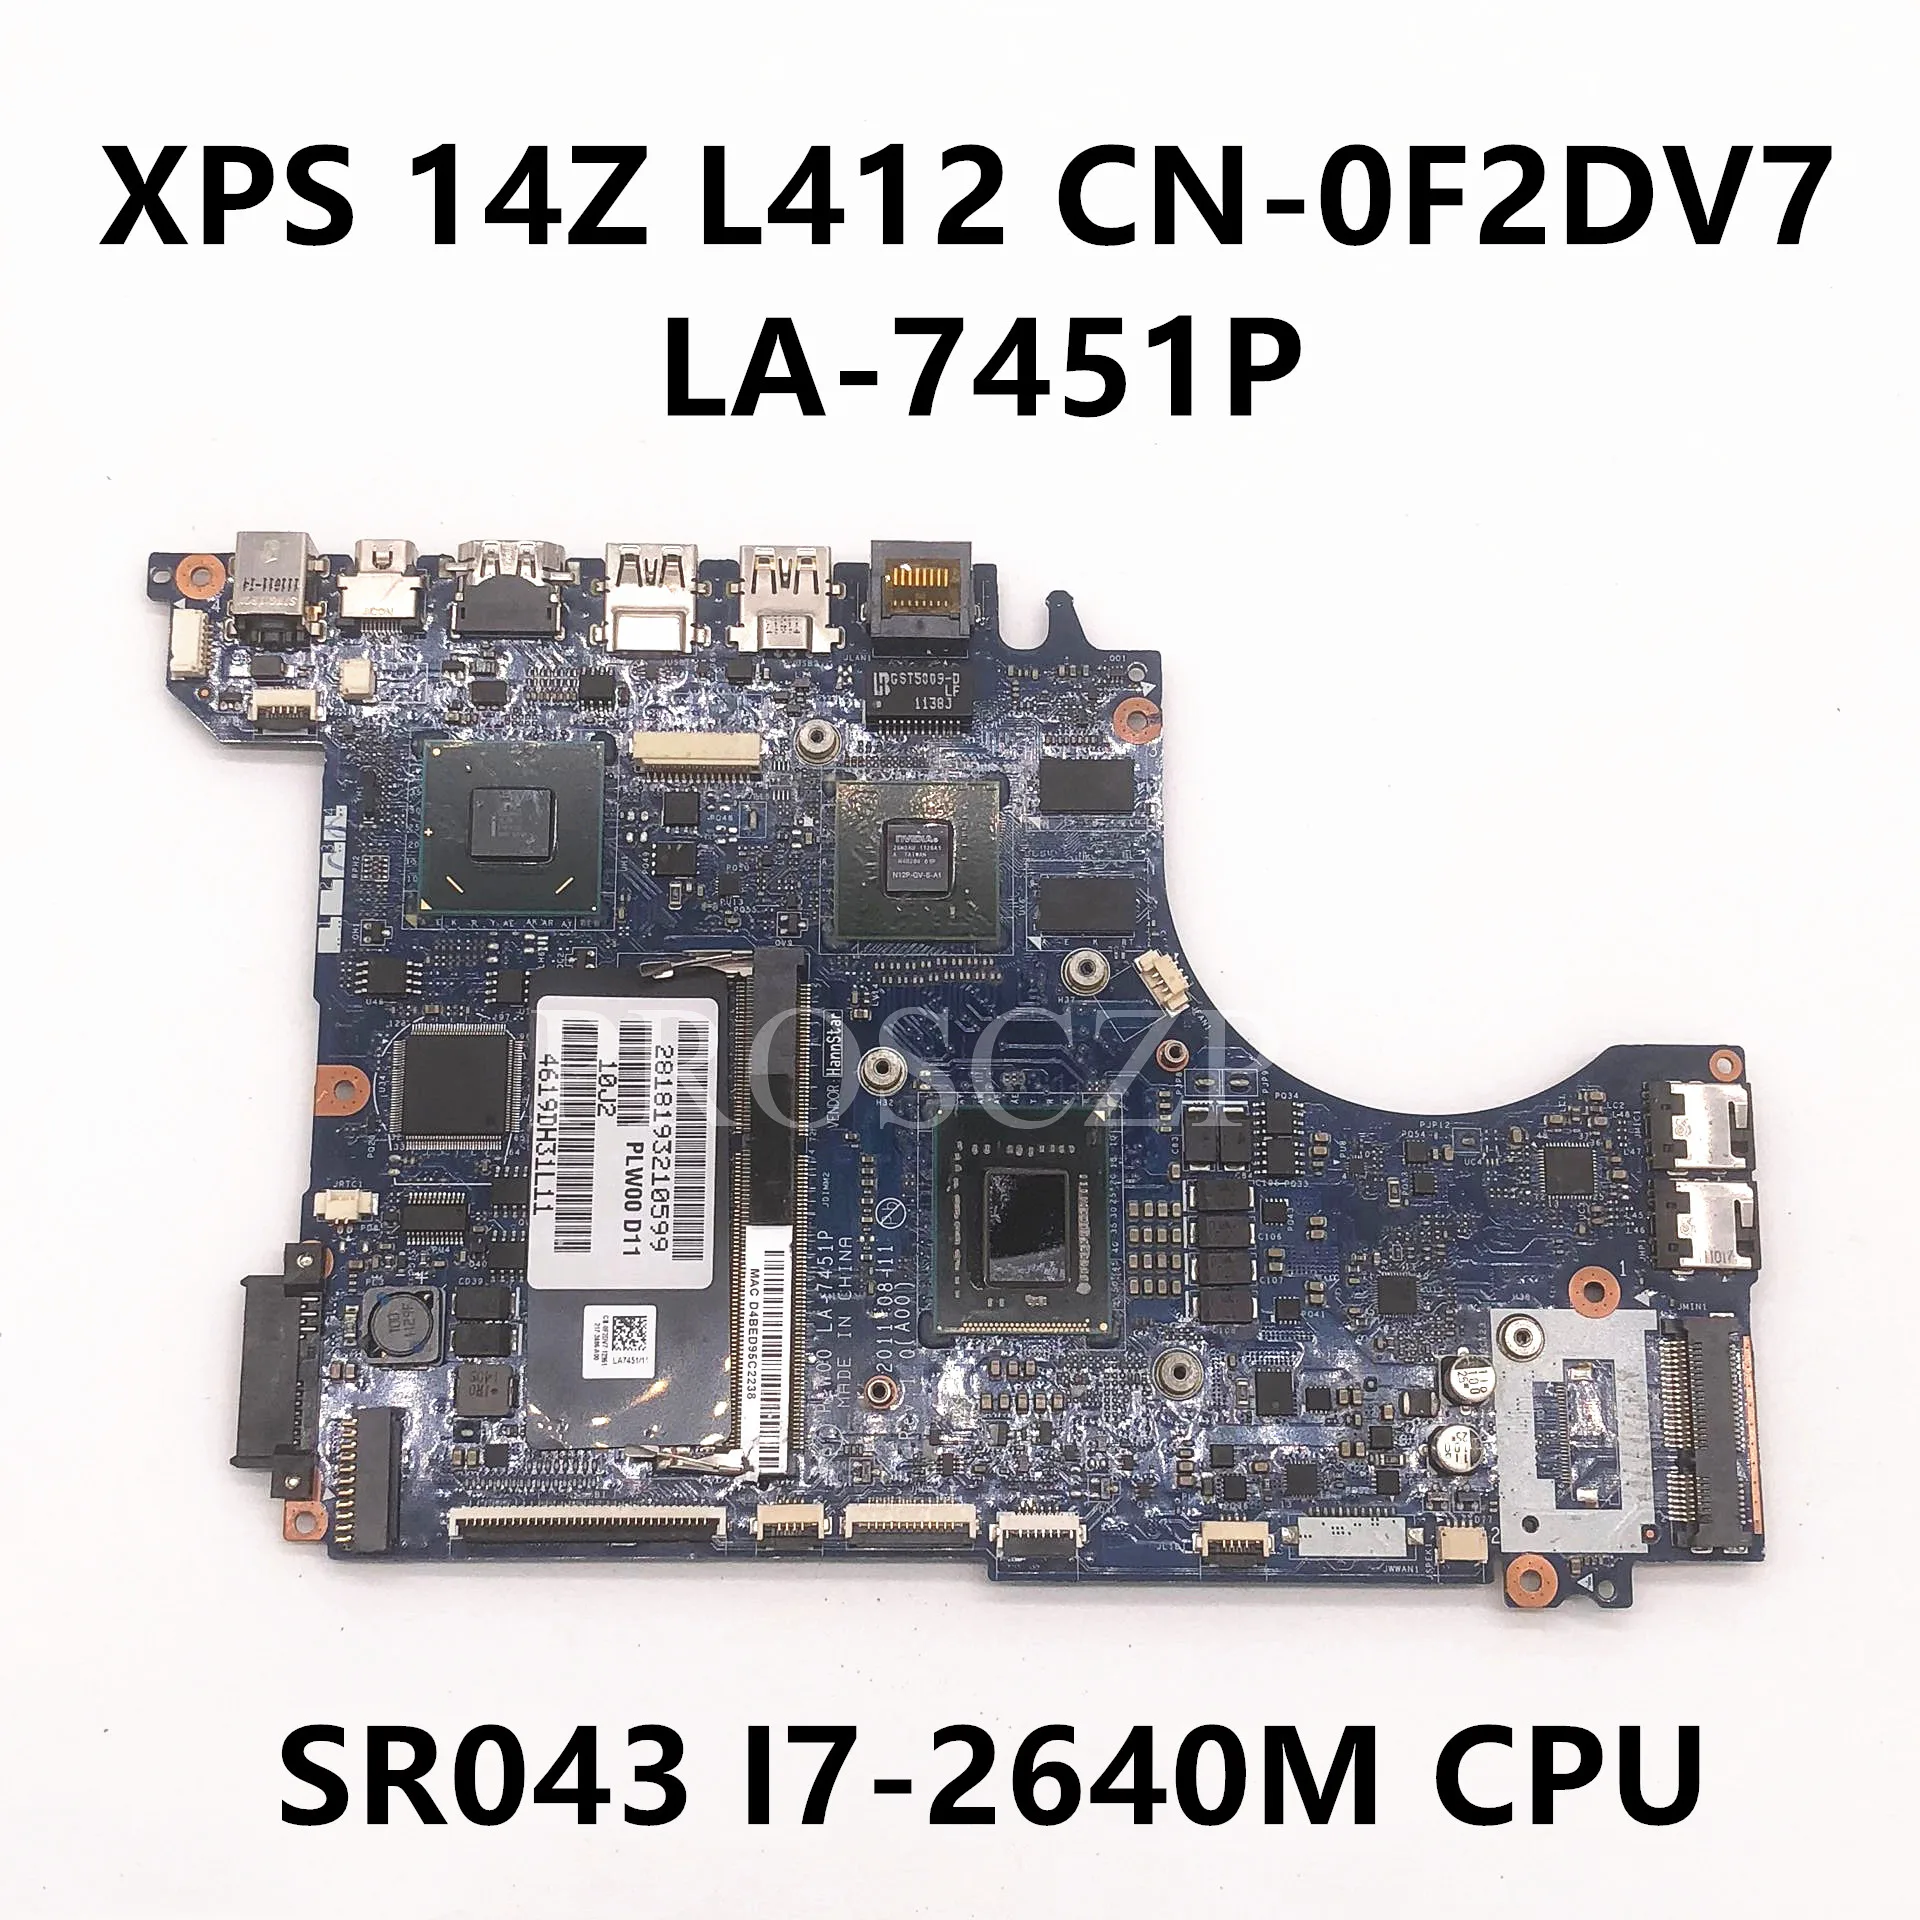 

CN-0F2DV7 0F2DV7 F2DV7 Mainboard For DELL XPS 14Z L412Z Laptop Motherboard LA-7451P With SR043 I7-2640M CPU GT520M 100% Tested